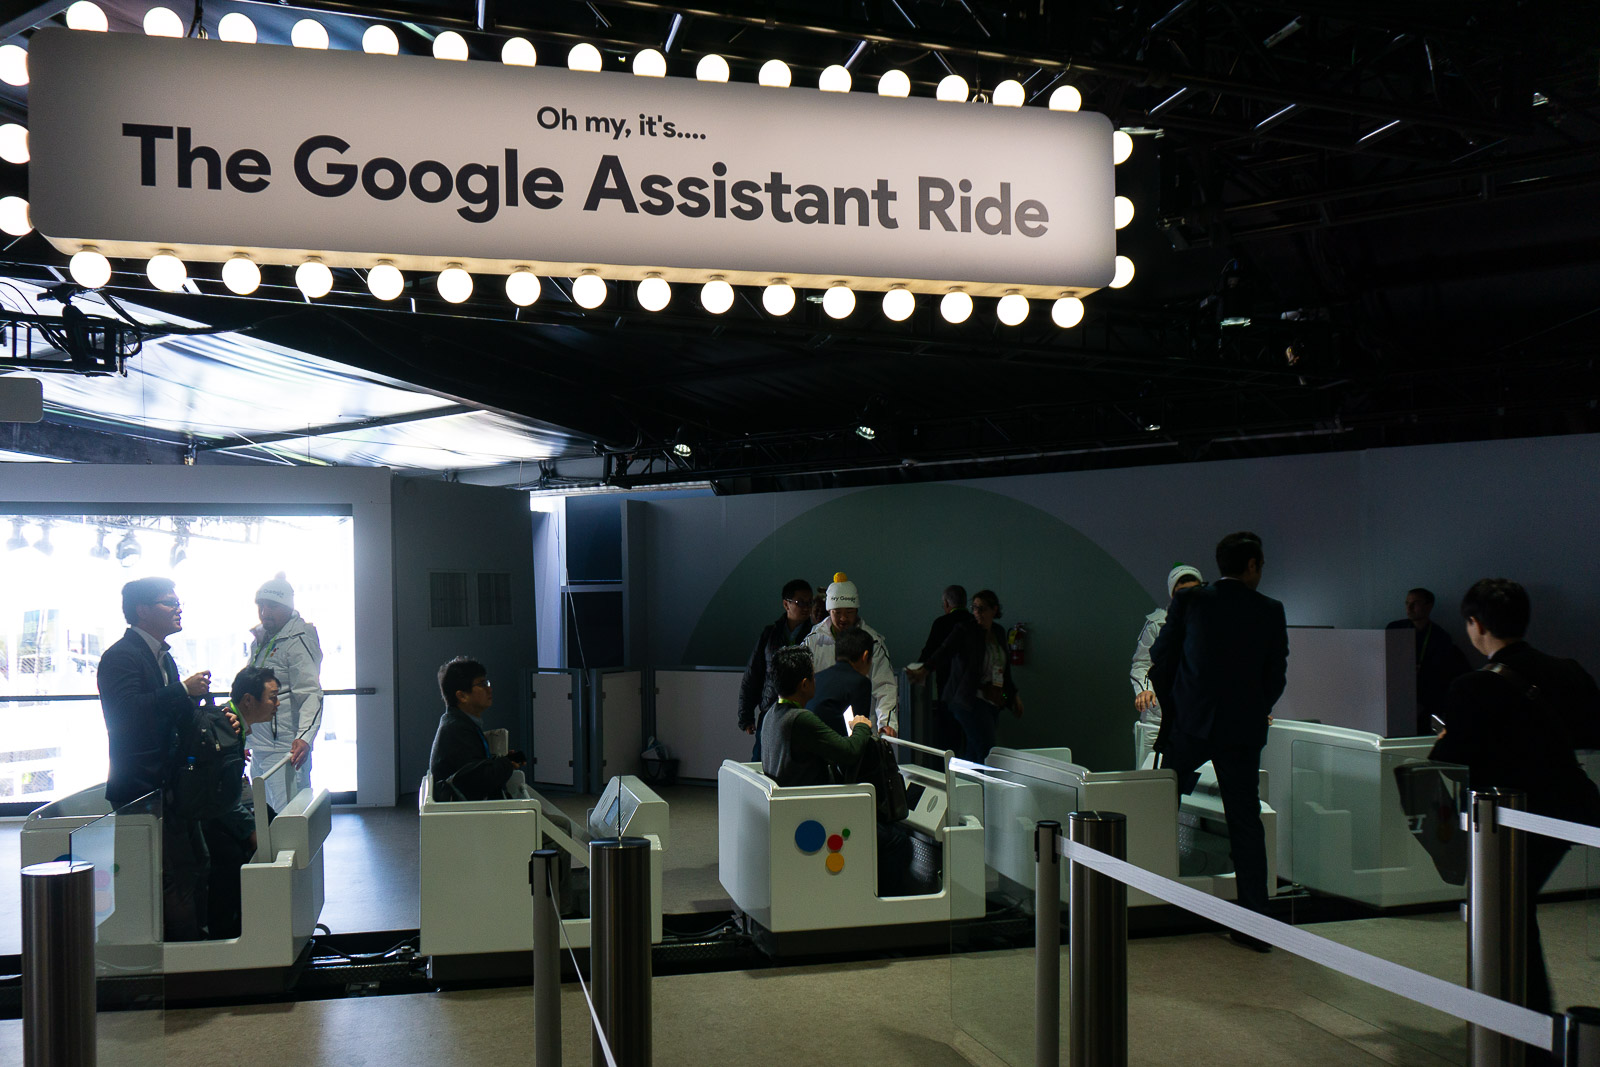 The Google Assistant Ride Loading Station